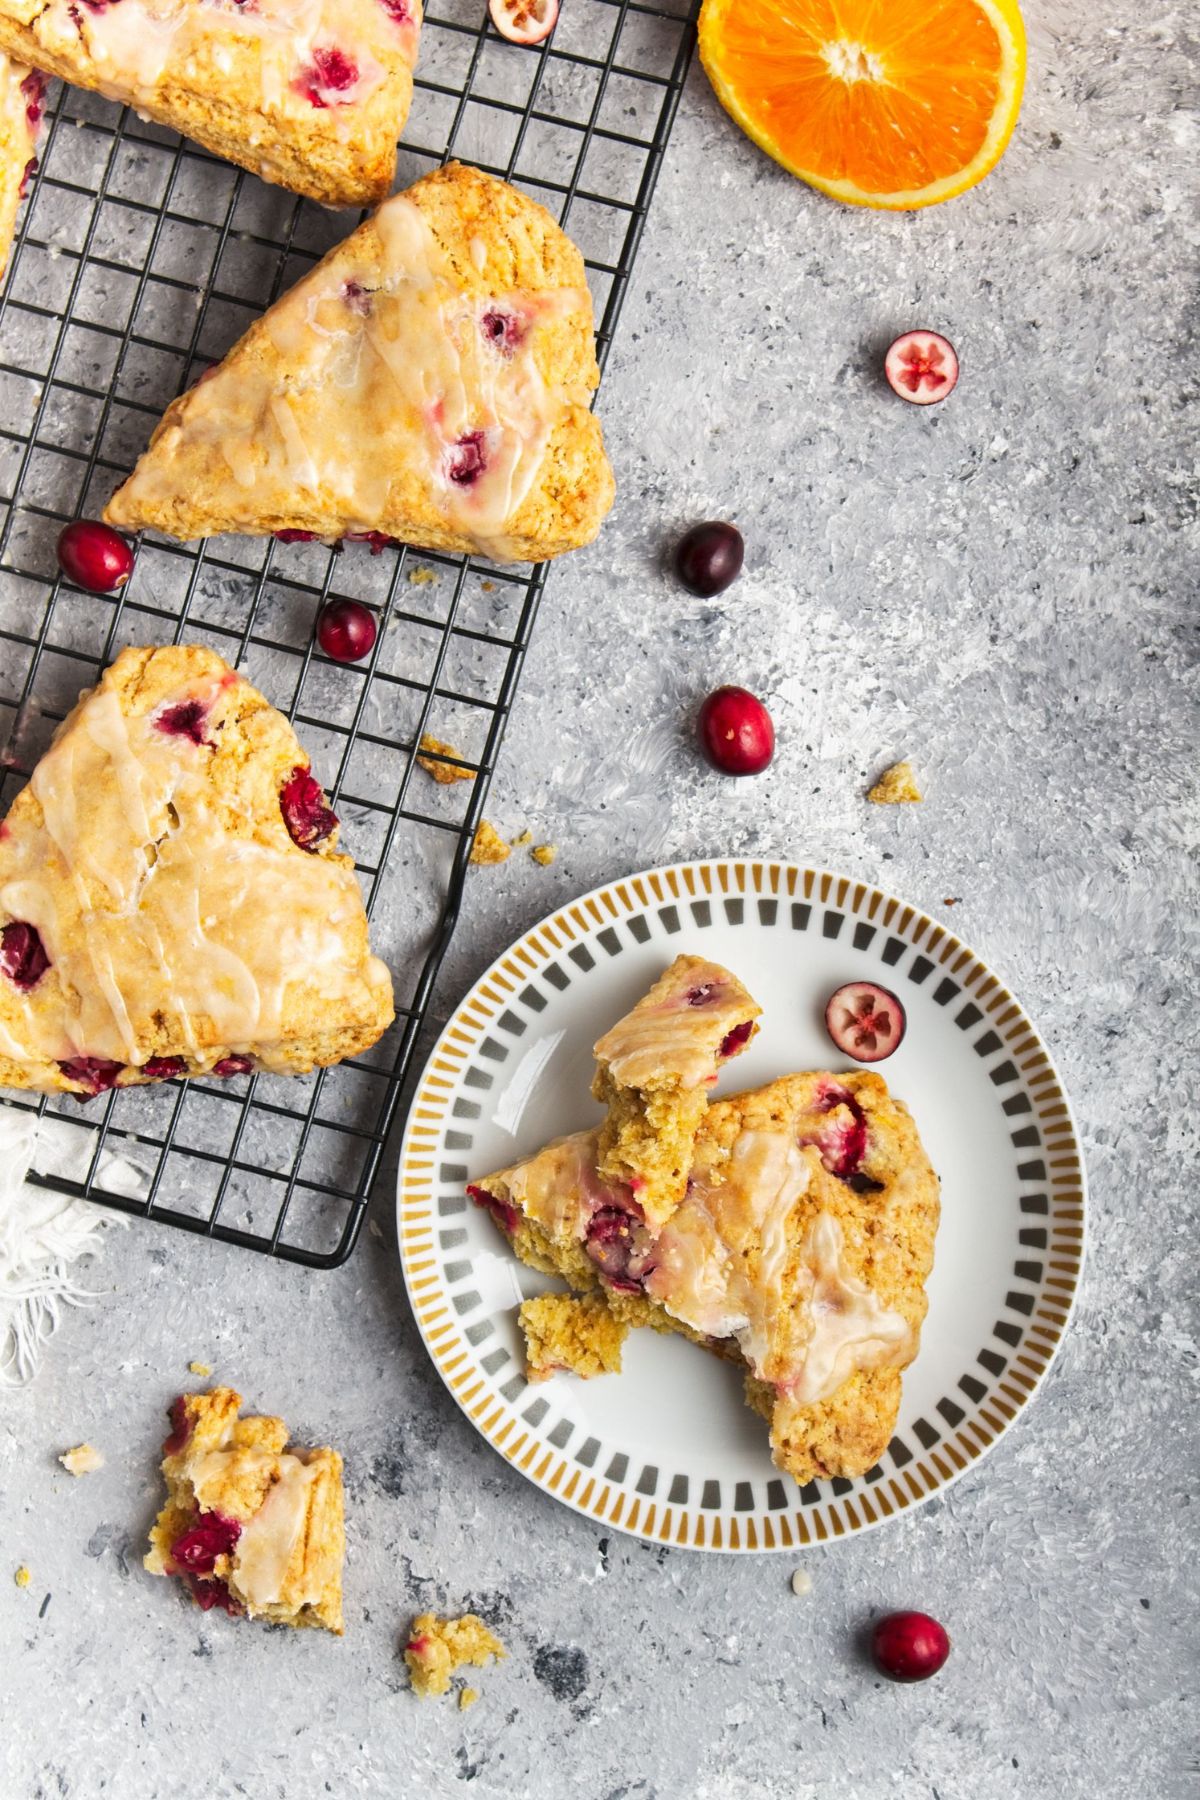 Looking down on a few Cranberry Orange scones.